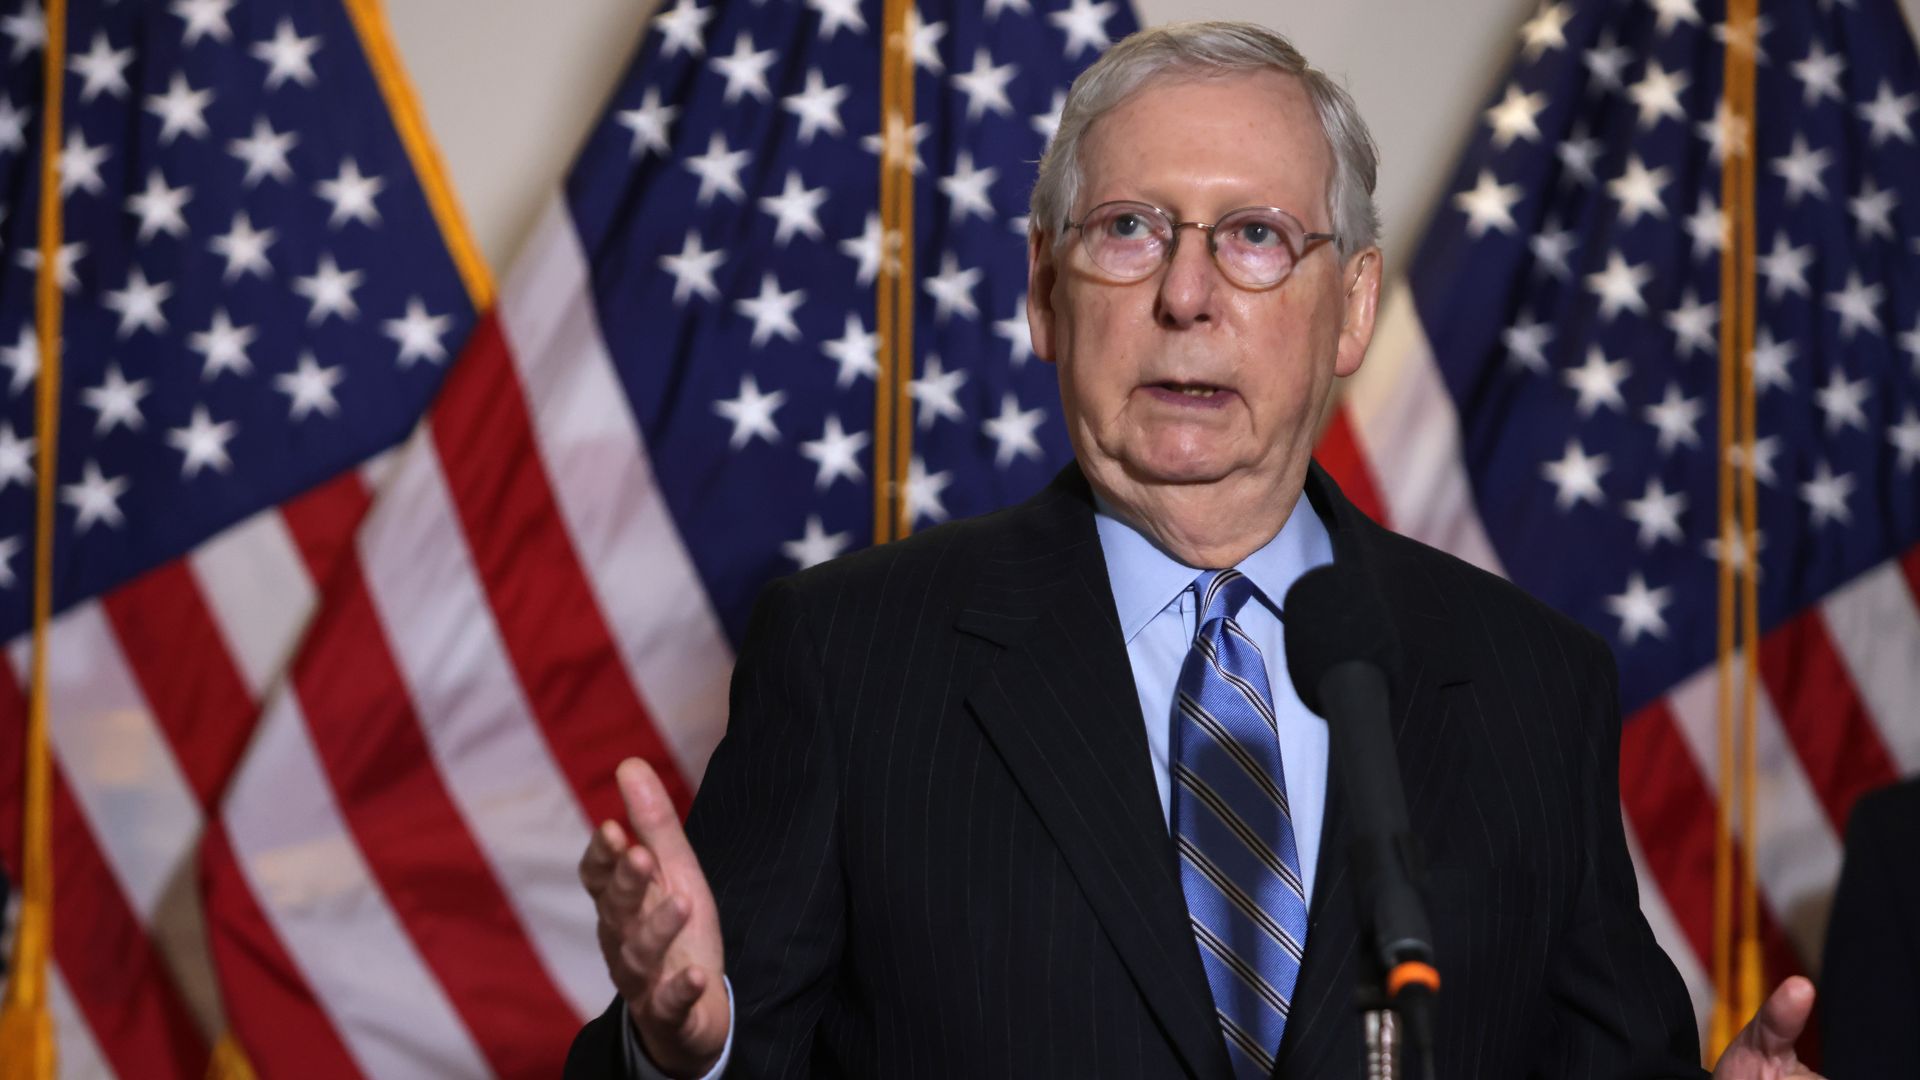 Sen. Mitch McConnell (R-KY) speaks after weekly Senate Republican Policy Luncheon in Washington, DC.  Photo by Alex Wong/Getty Images